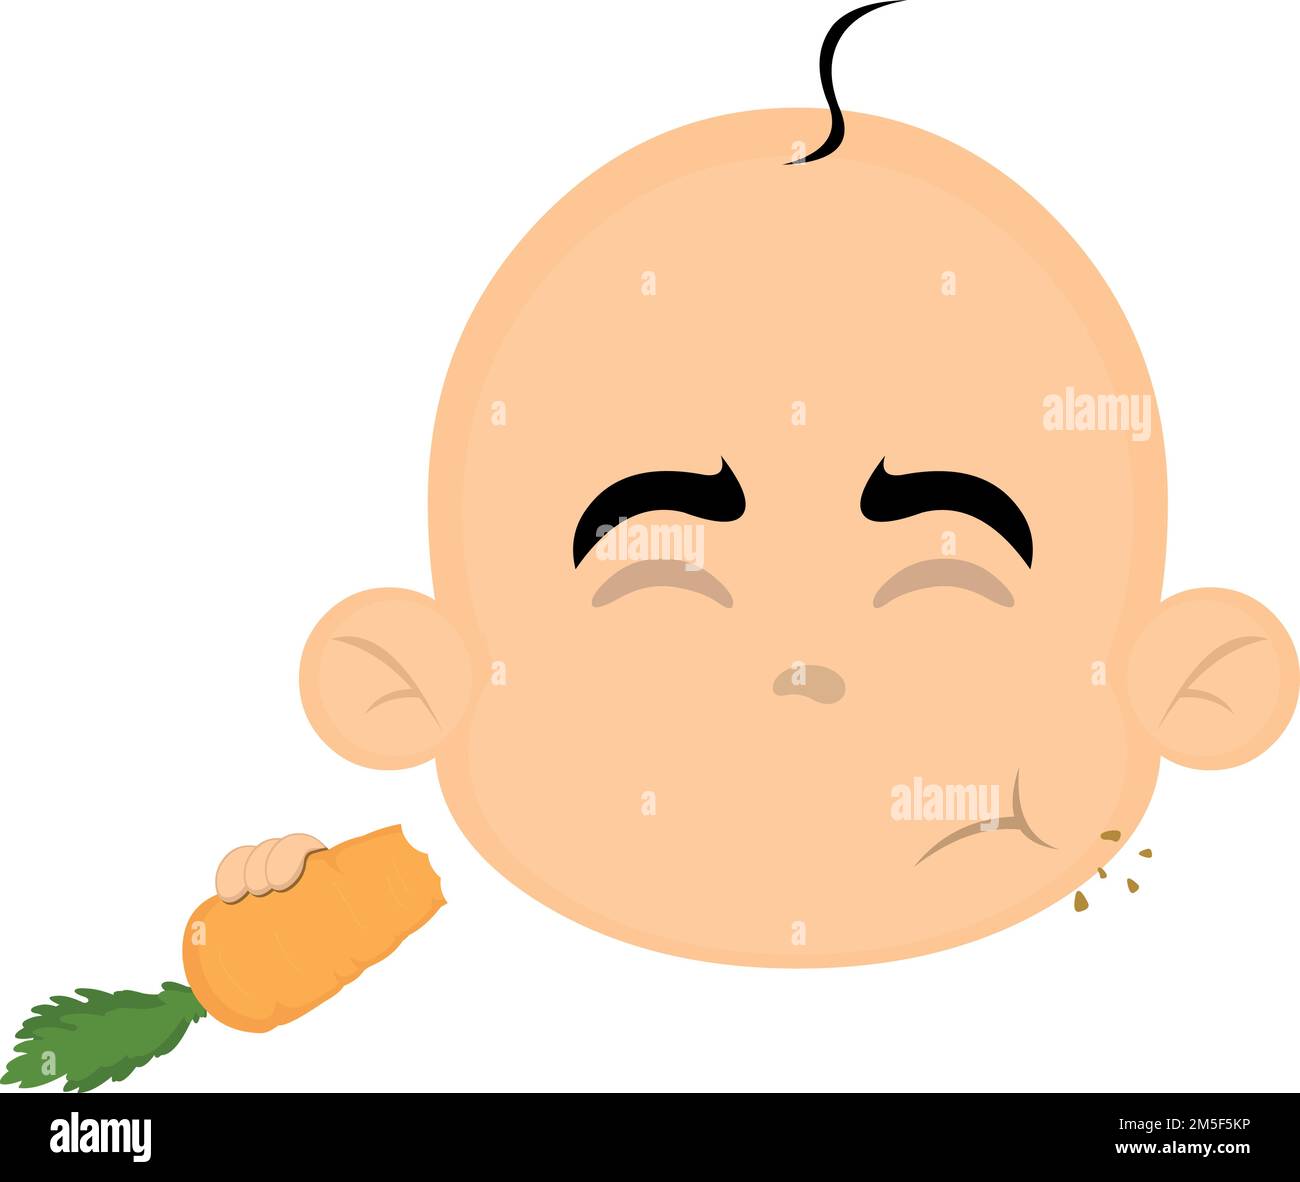 vector illustration of the face of a baby cartoon eating carrot Stock Vector